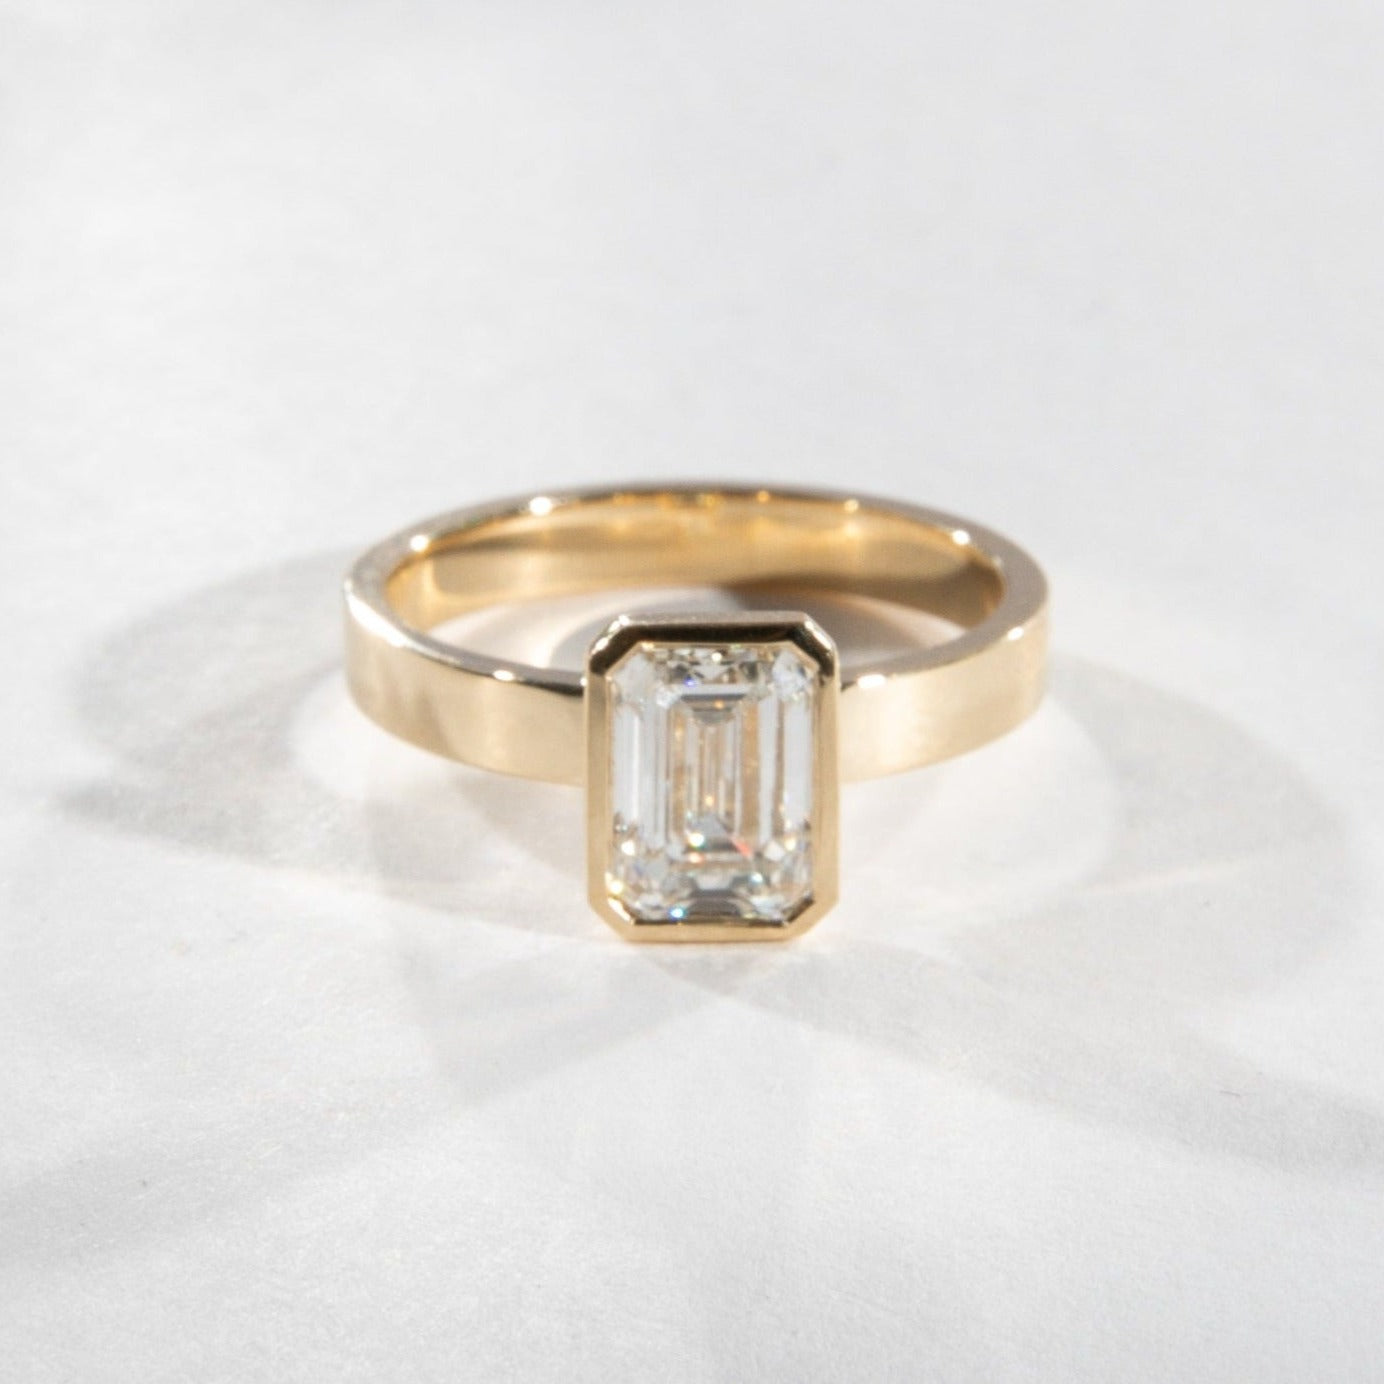 Badi Unique ring in 14k Yellow Gold set with a lab-grown diamond